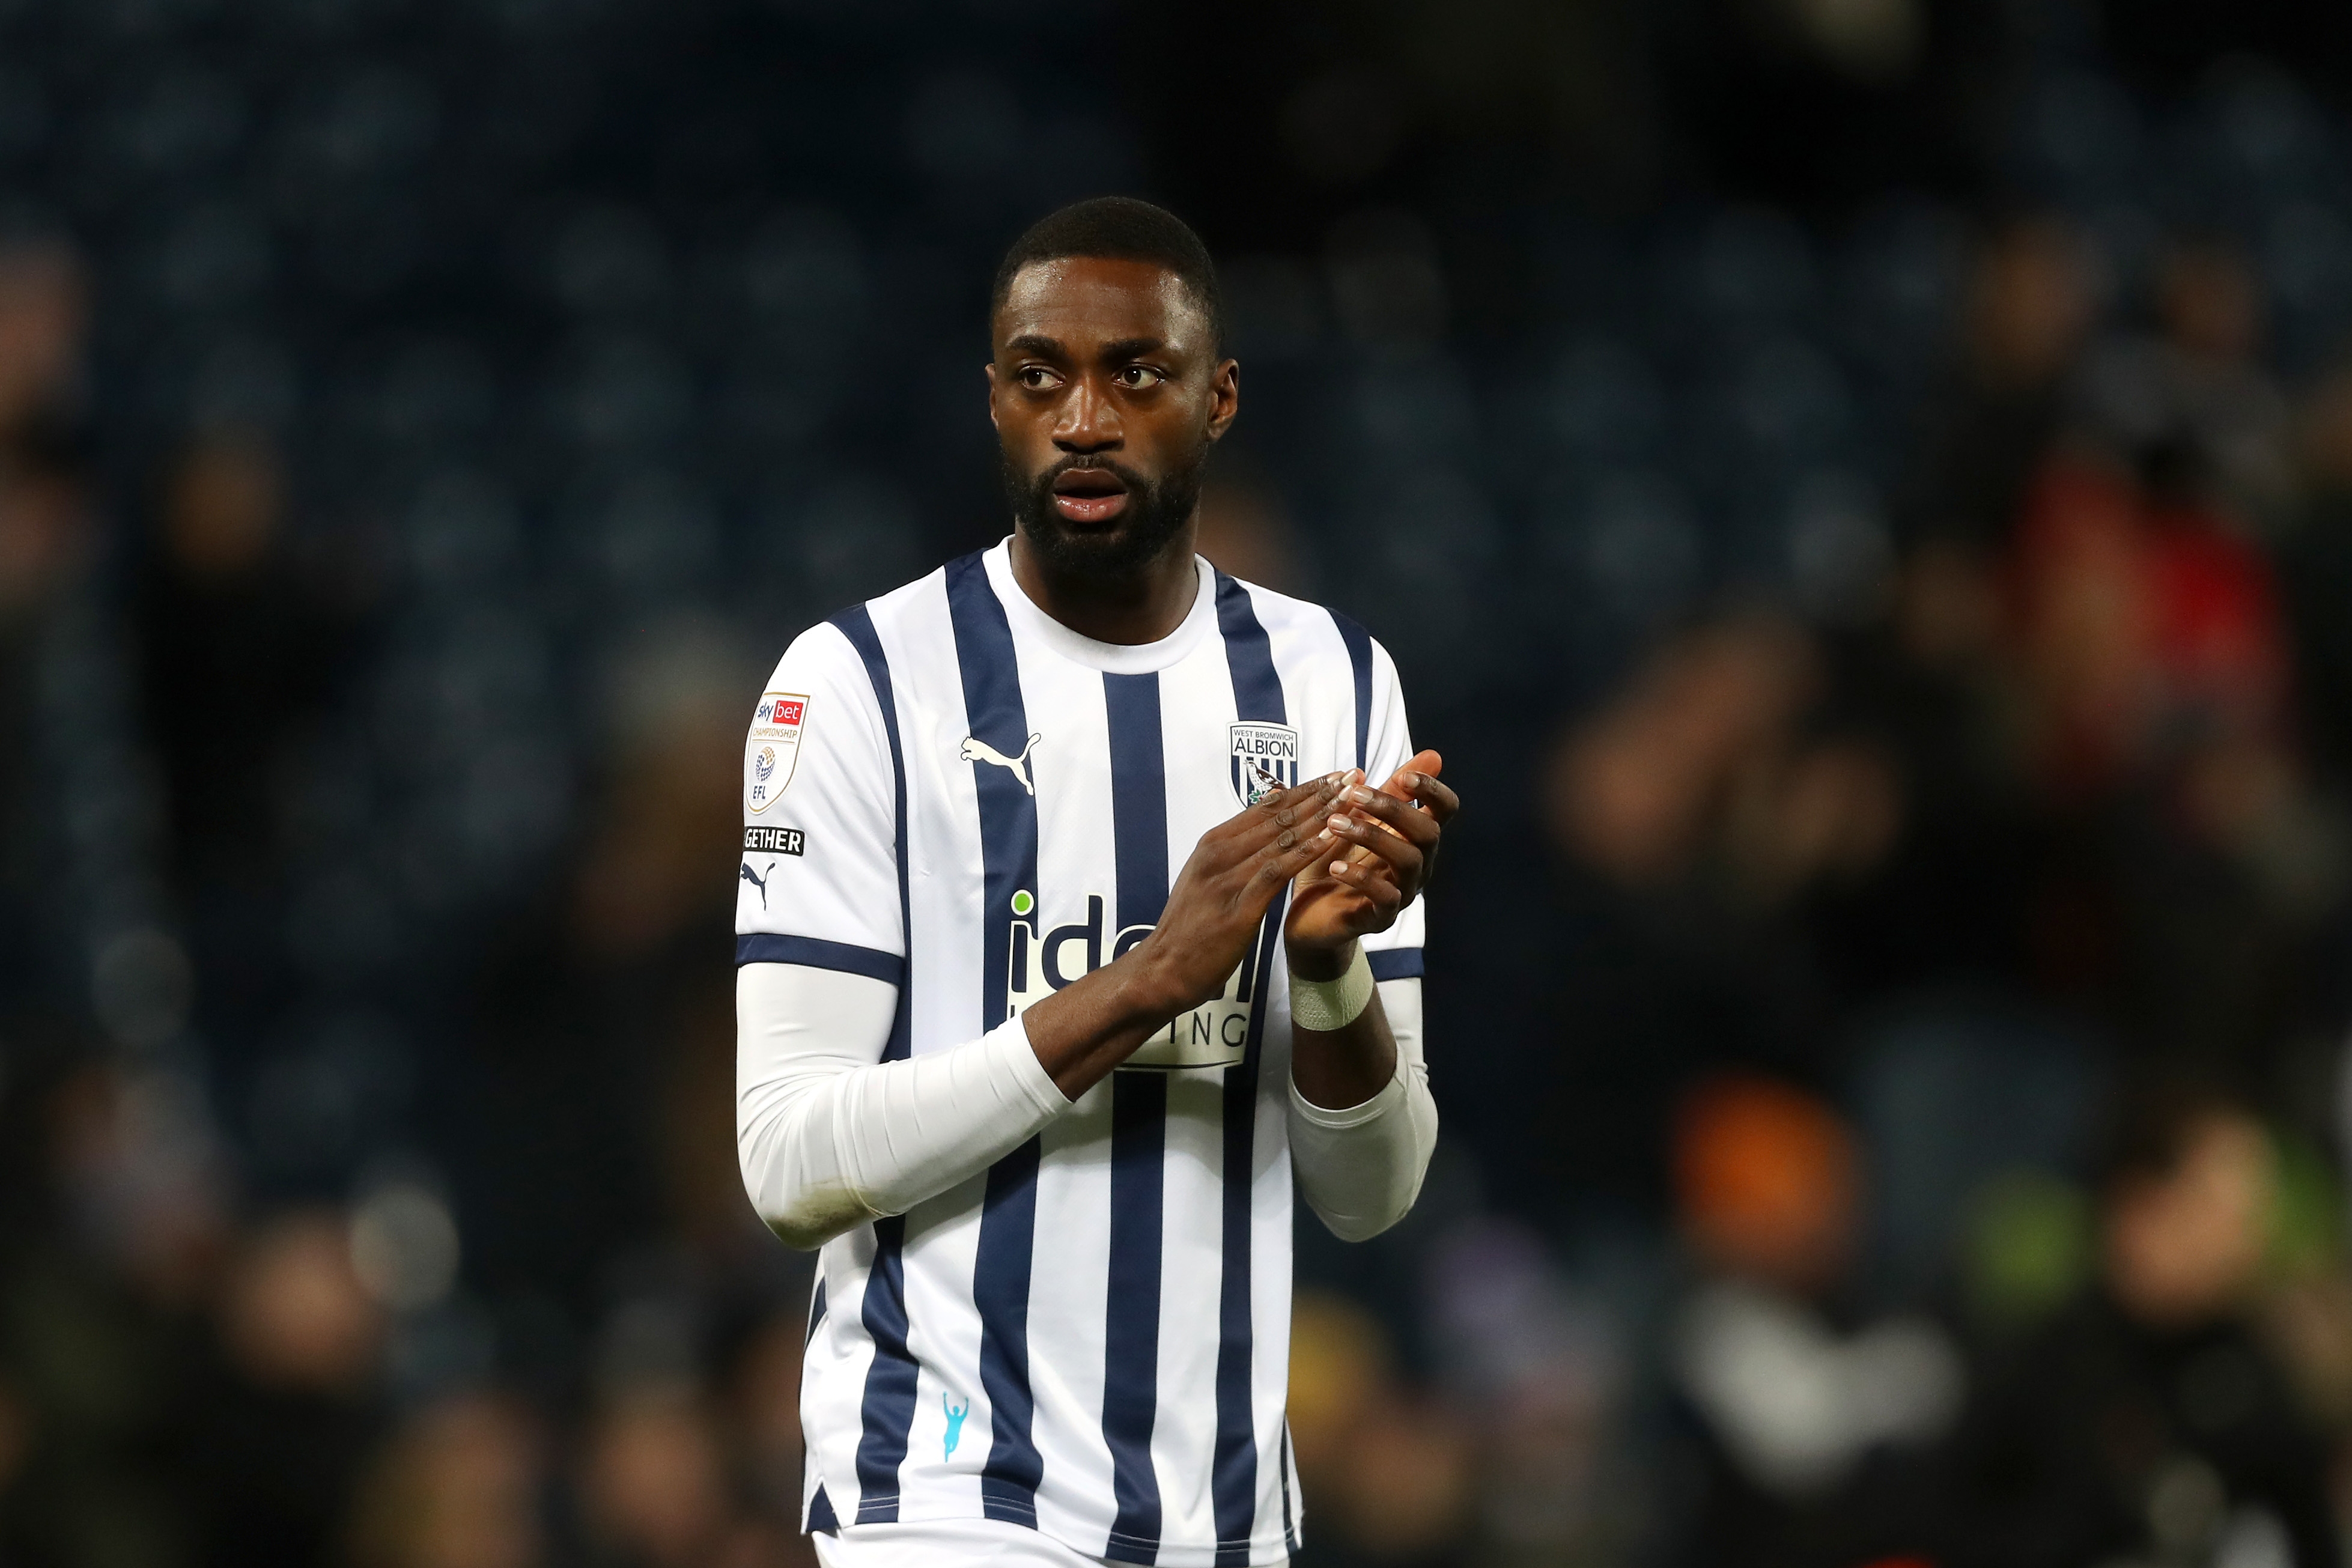 Semi Ajayi applauds supporters at full-time against Ipswich 